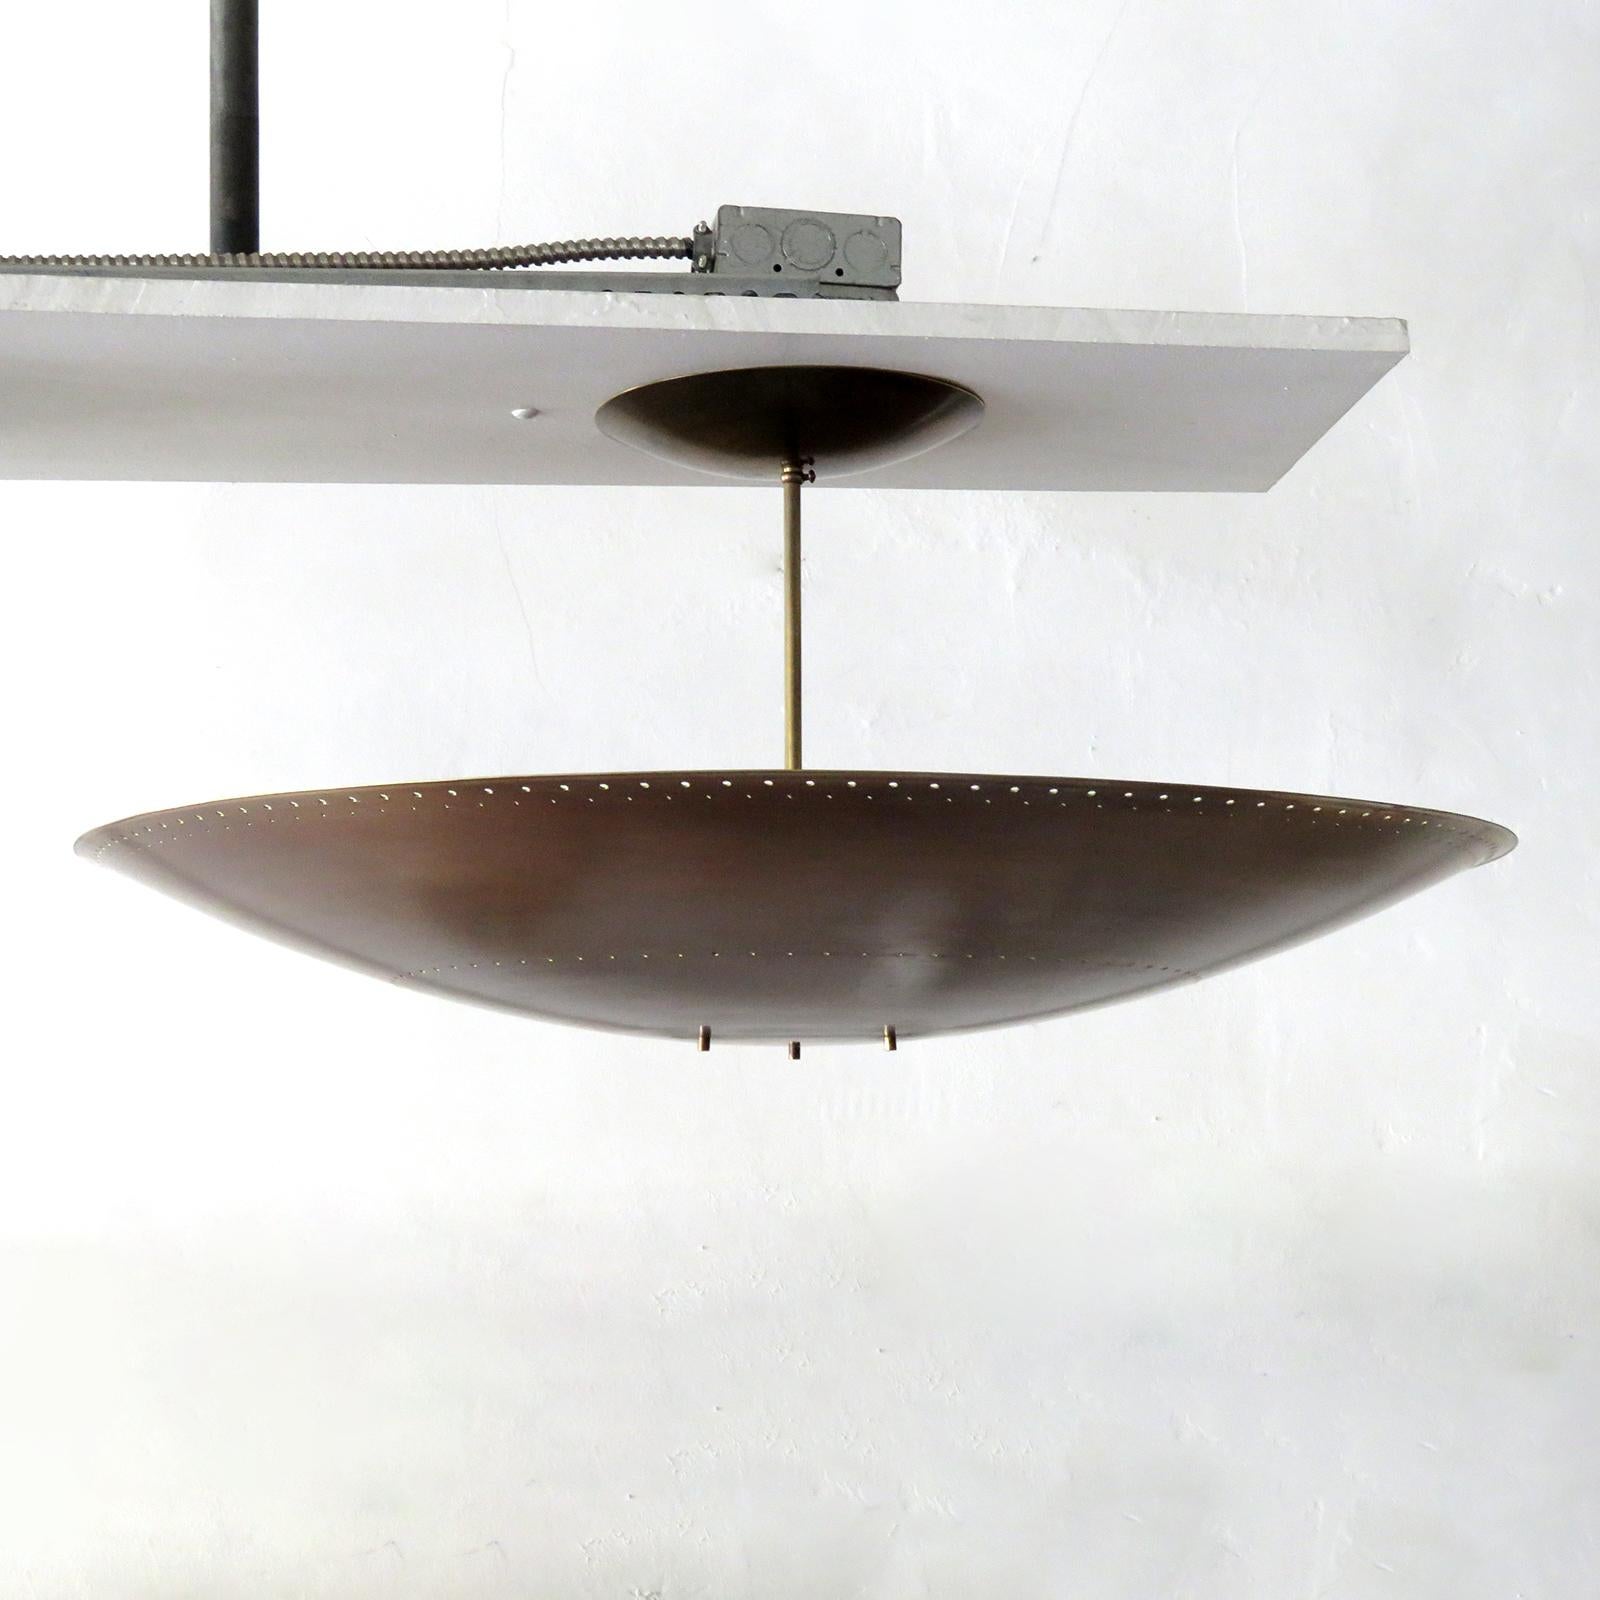 Large-scale ceiling flushmount light Utah-30 by Gallery L7, handcrafted and finished in Los Angeles from American brass, suspended perforated aged, raw brass disc (30inch diameter). Six E12 sockets per fixture, max. wattage 40w each, wired for US